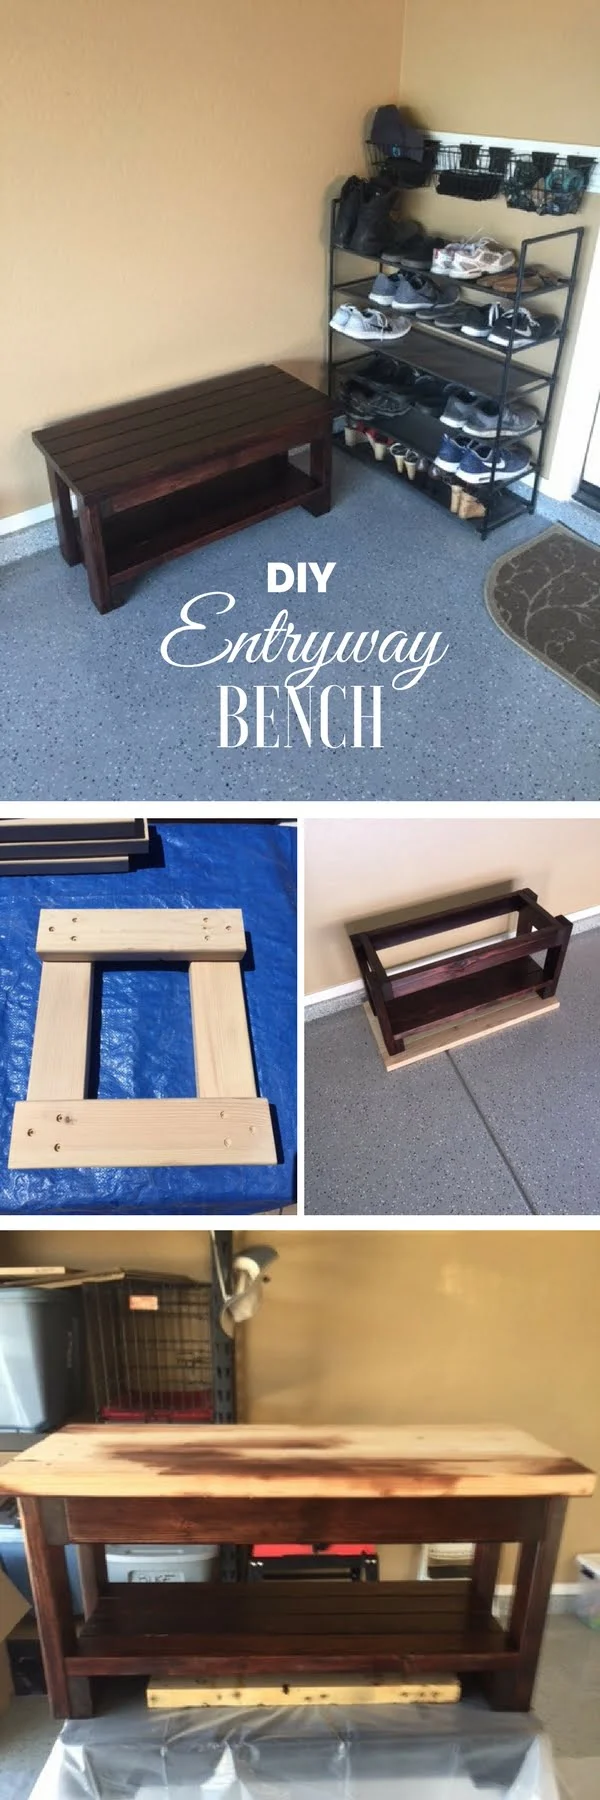 20 Crafty 2x4 DIY Projects That You Can Easily Make - Check out how to make a DIY wooden entryway bench from 2x4s